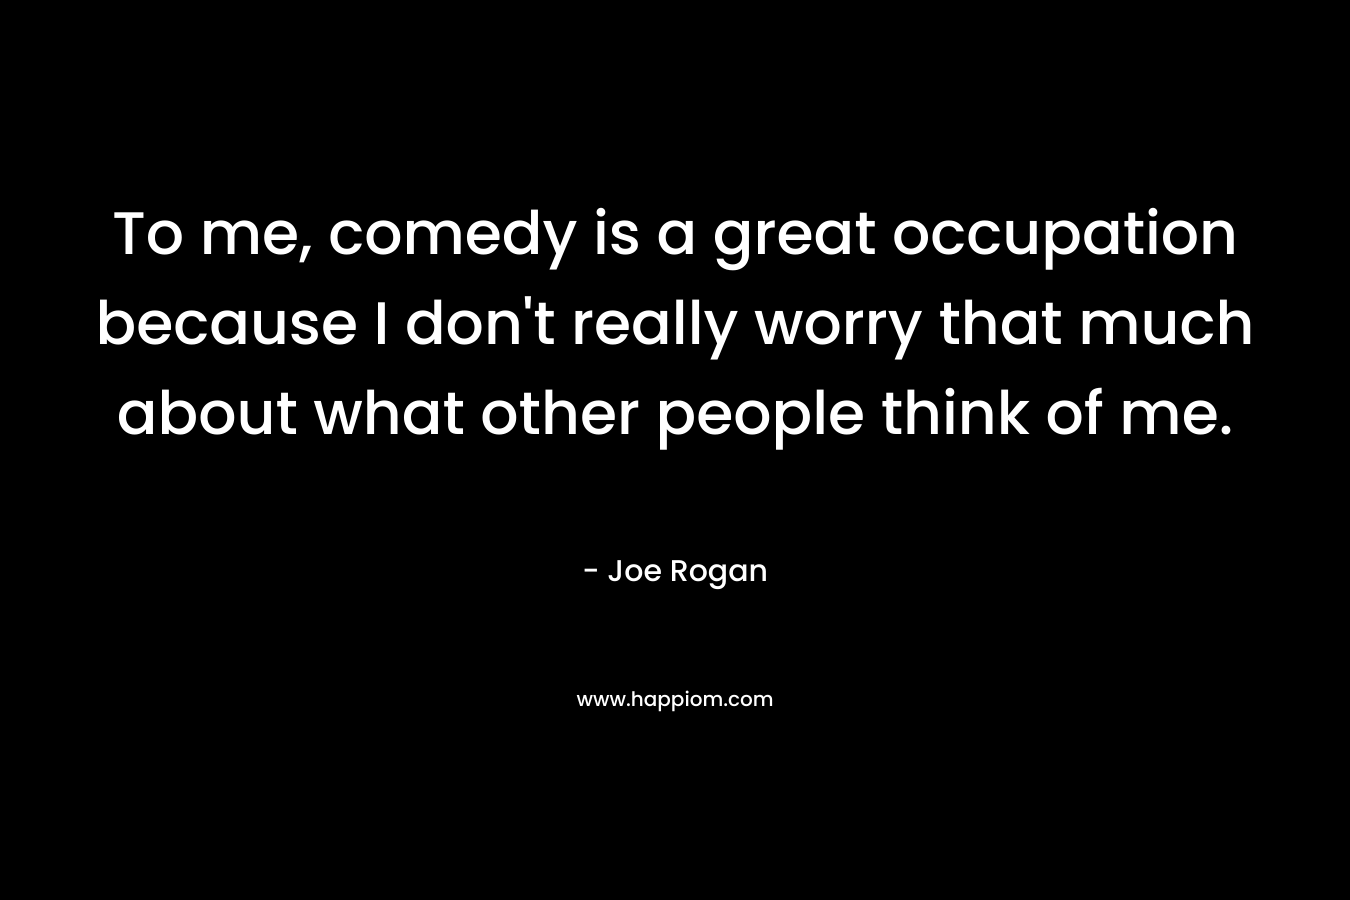 To me, comedy is a great occupation because I don’t really worry that much about what other people think of me. – Joe Rogan